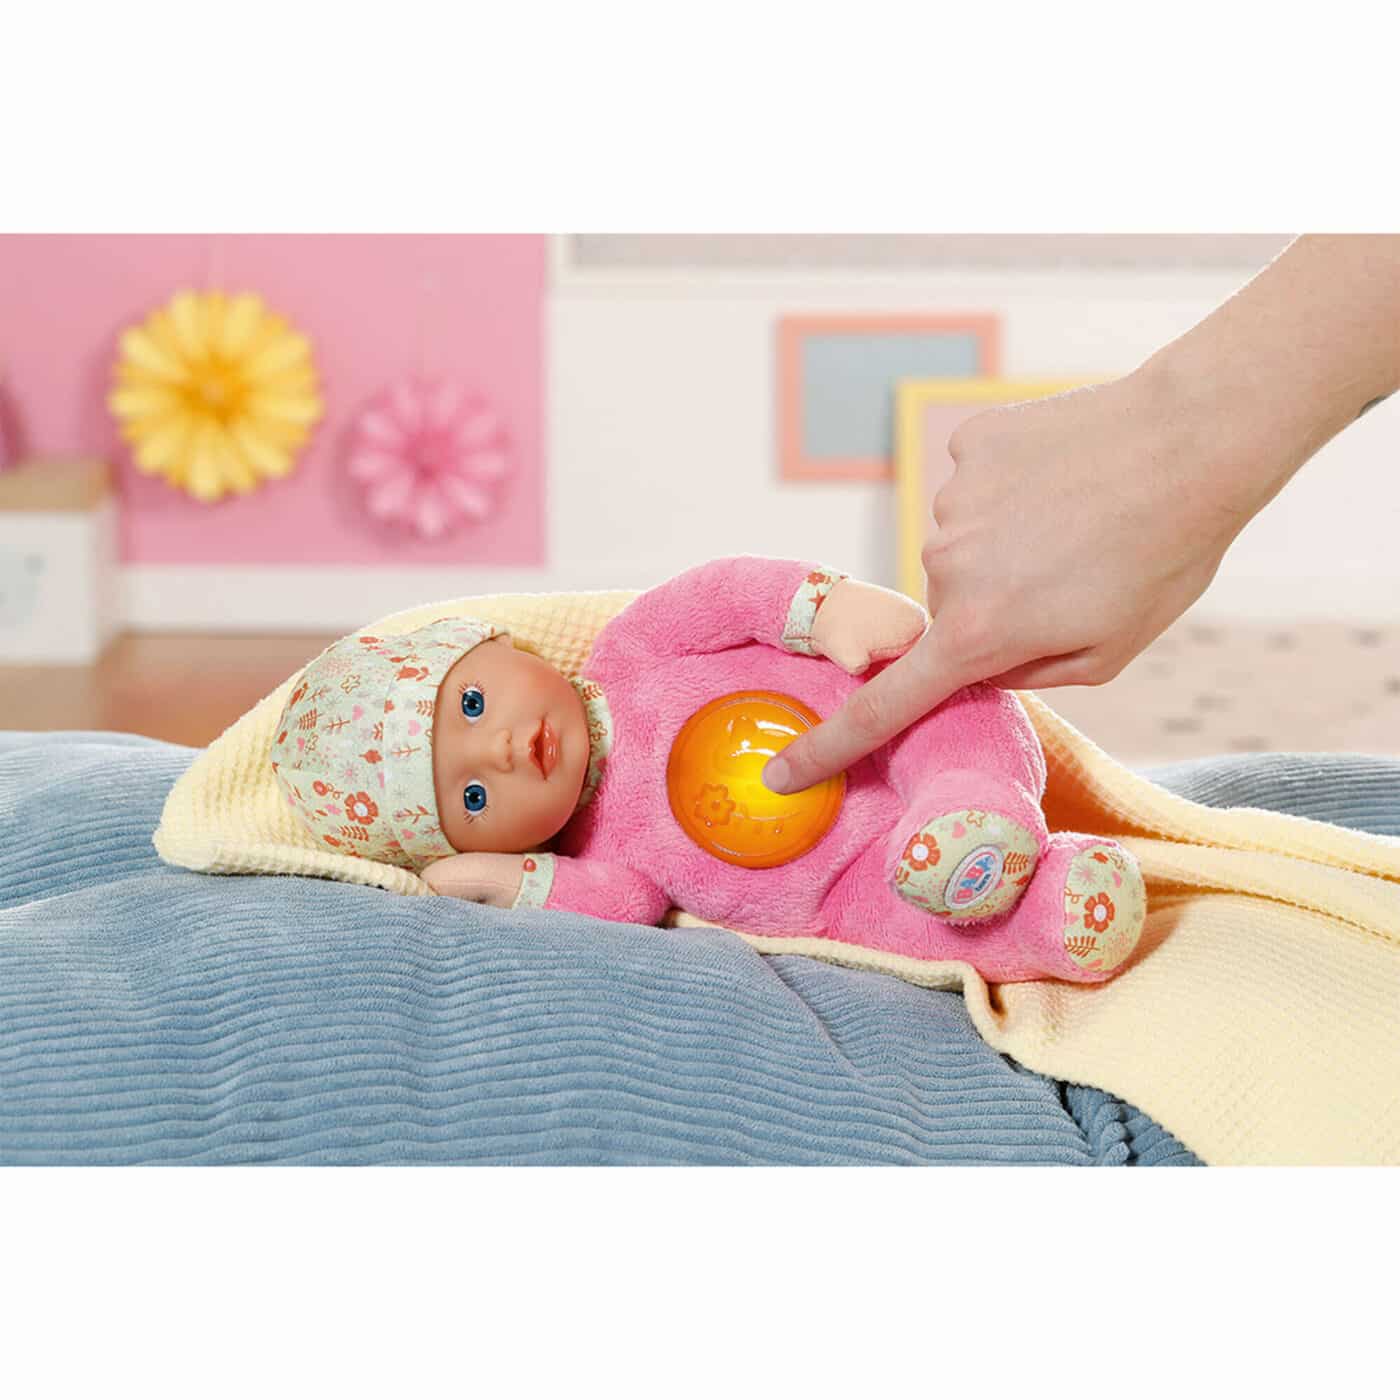 BABY Born NightFriends Doll for Babies 30cm1